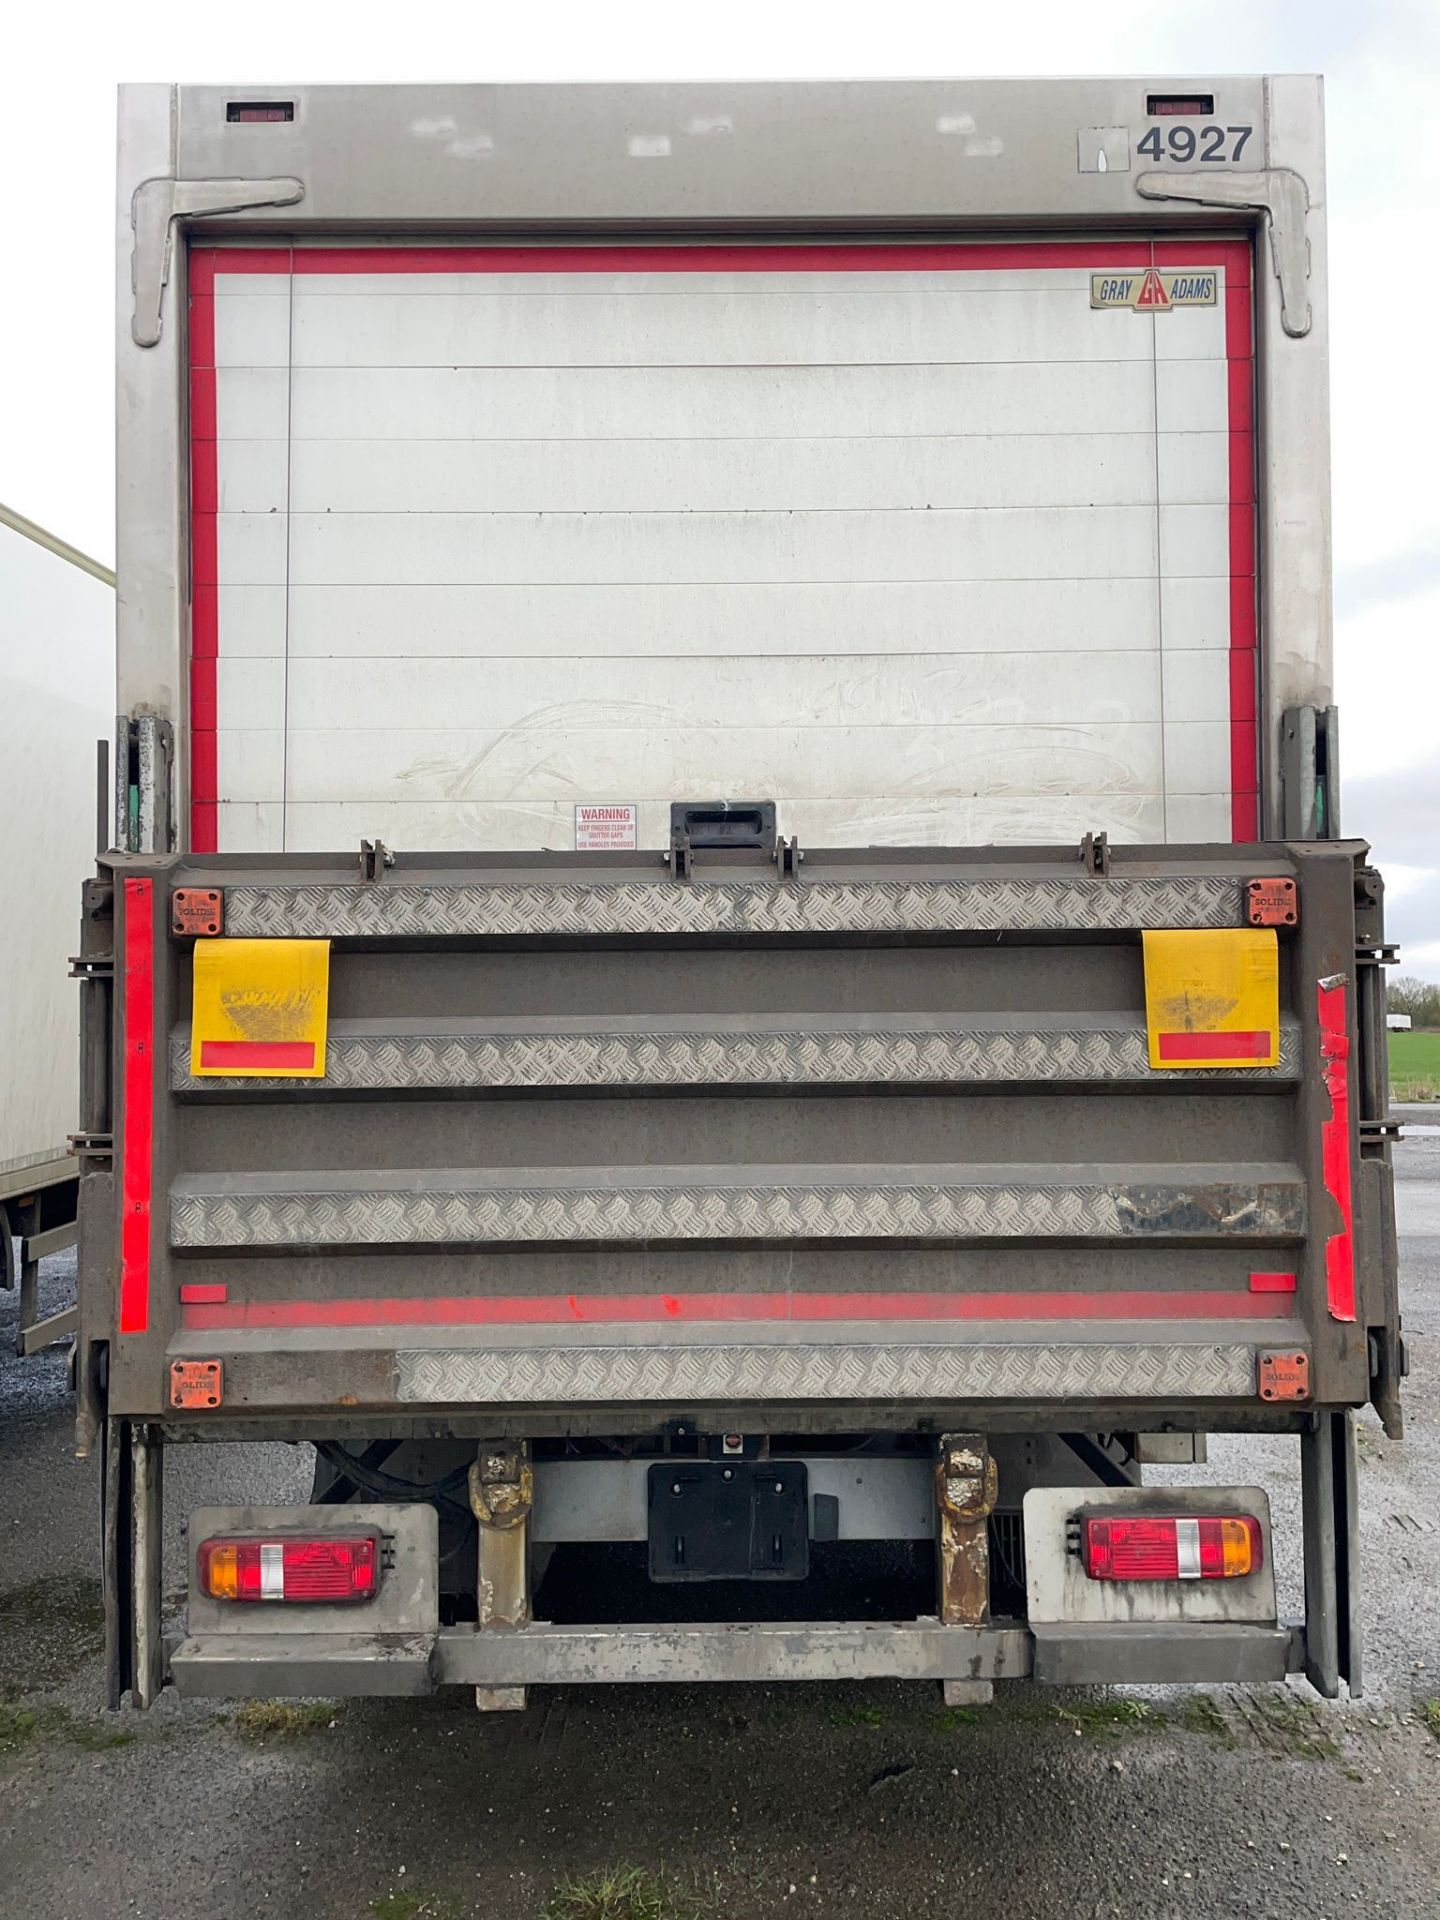 2013 G&A 10.4m Tandem Refrigerated Multi-Temp Trailer - Image 10 of 14